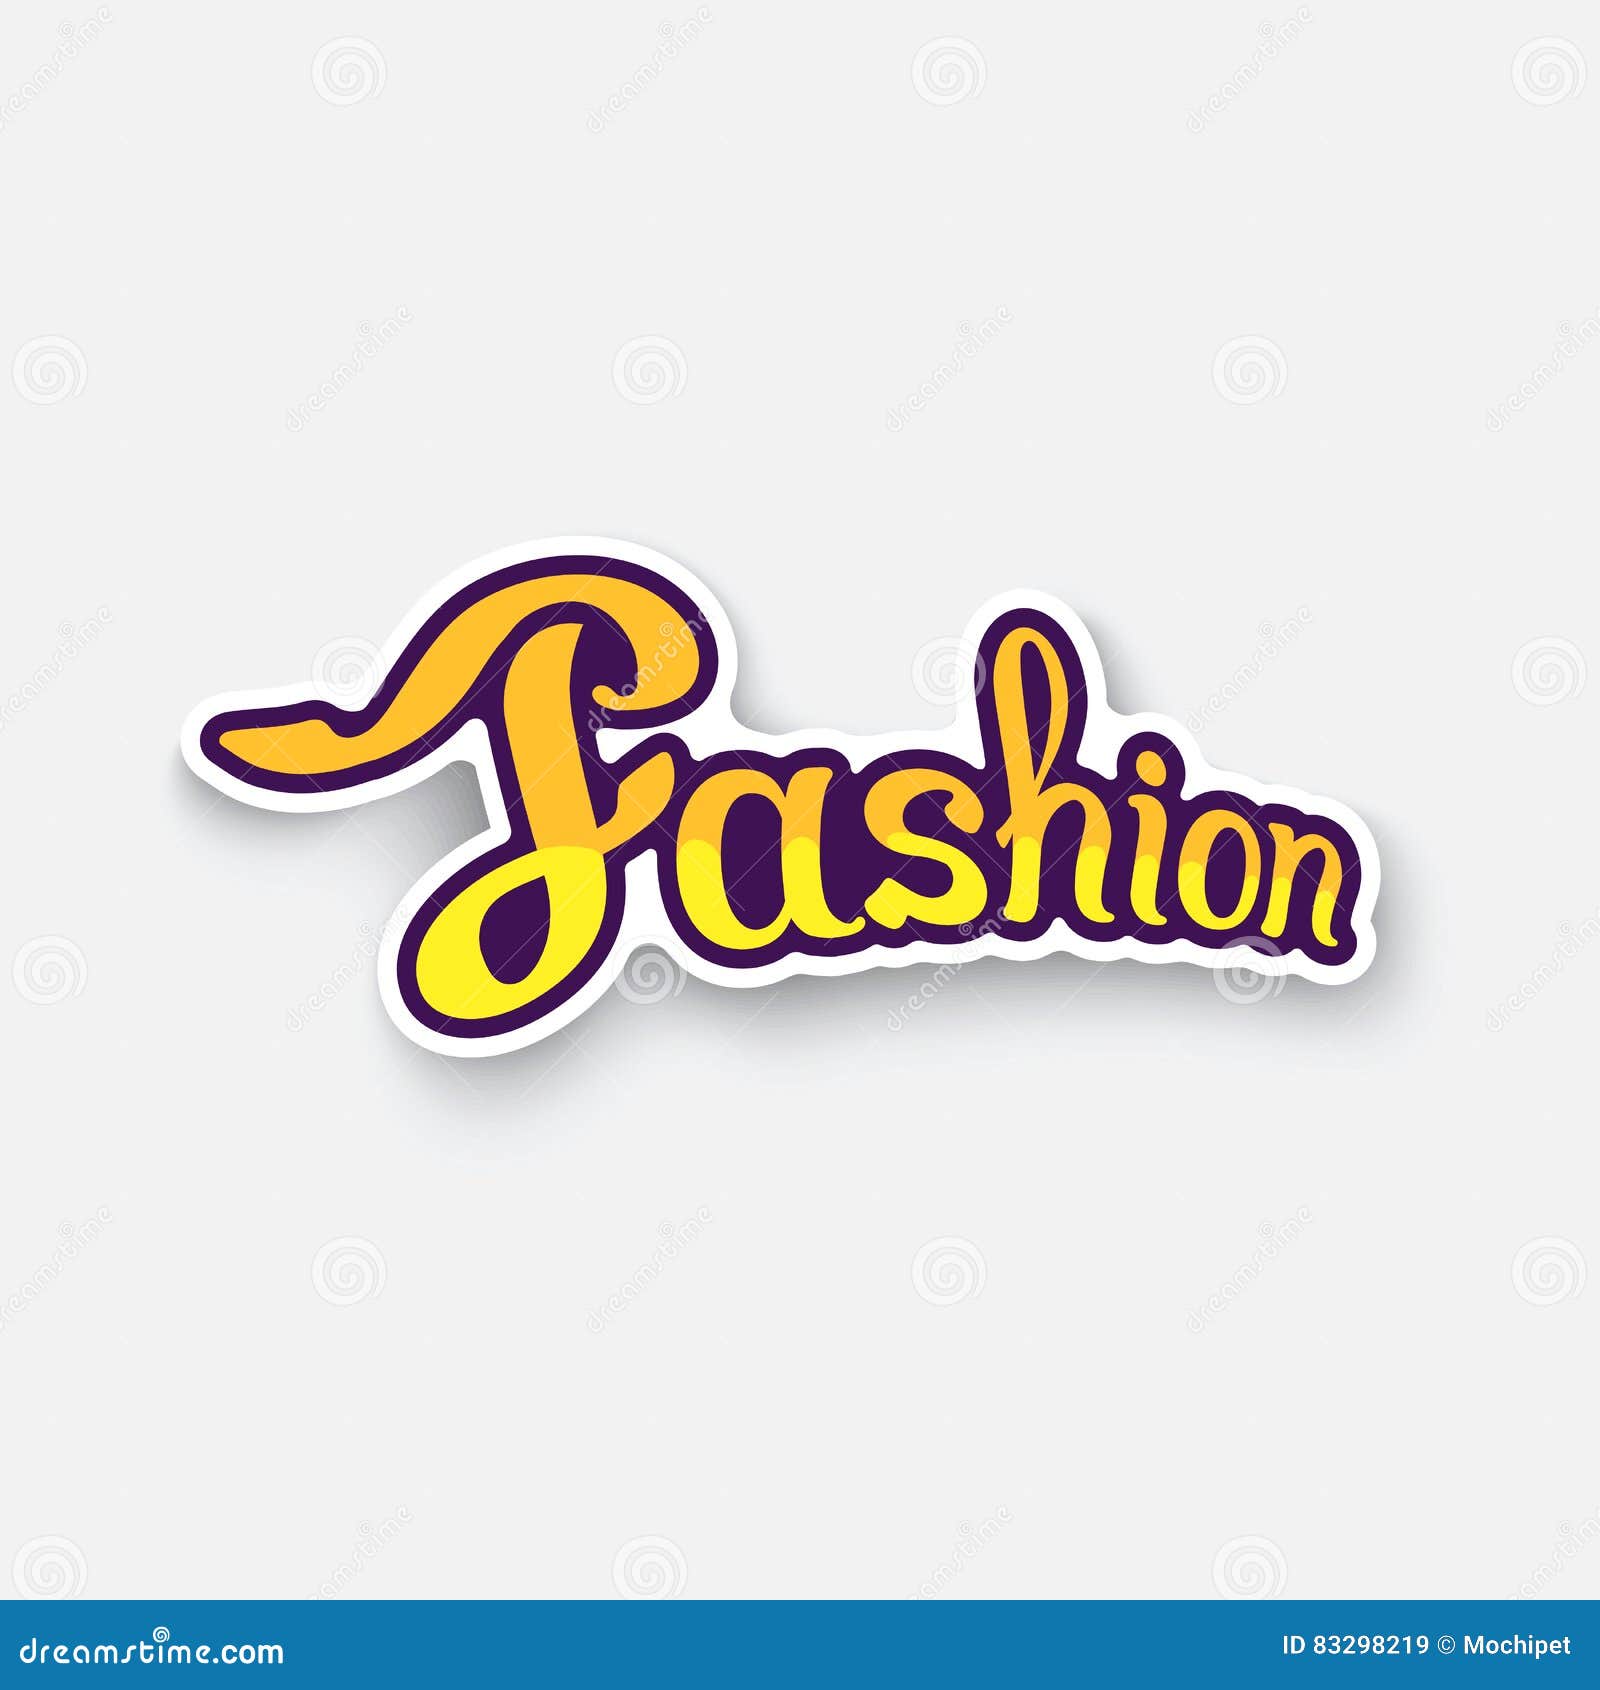 Cartoon Sticker with the Word Fashion Stock Vector - Illustration of ...